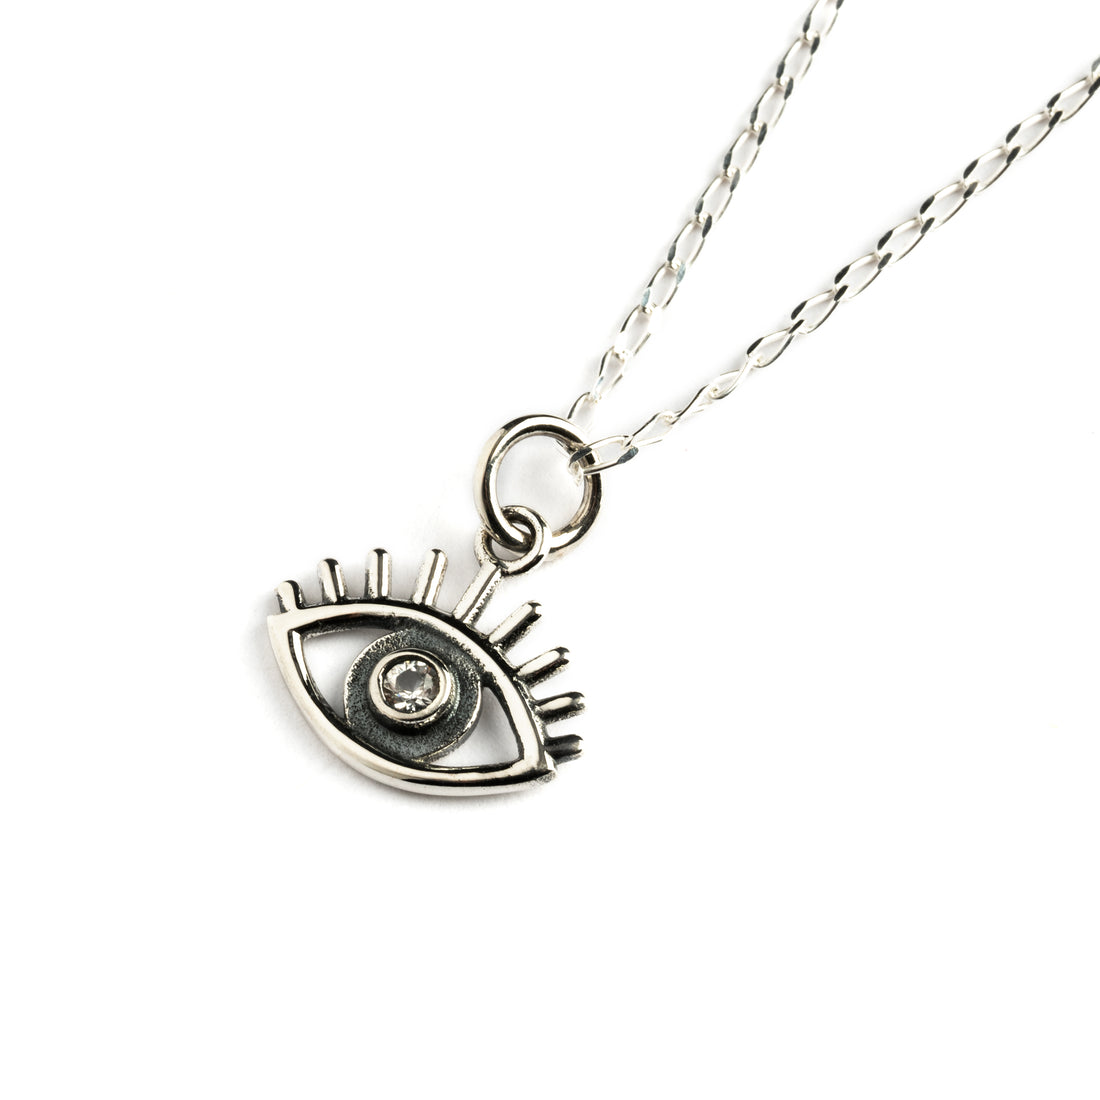 Zircon Evil Eye Charm necklace right side view